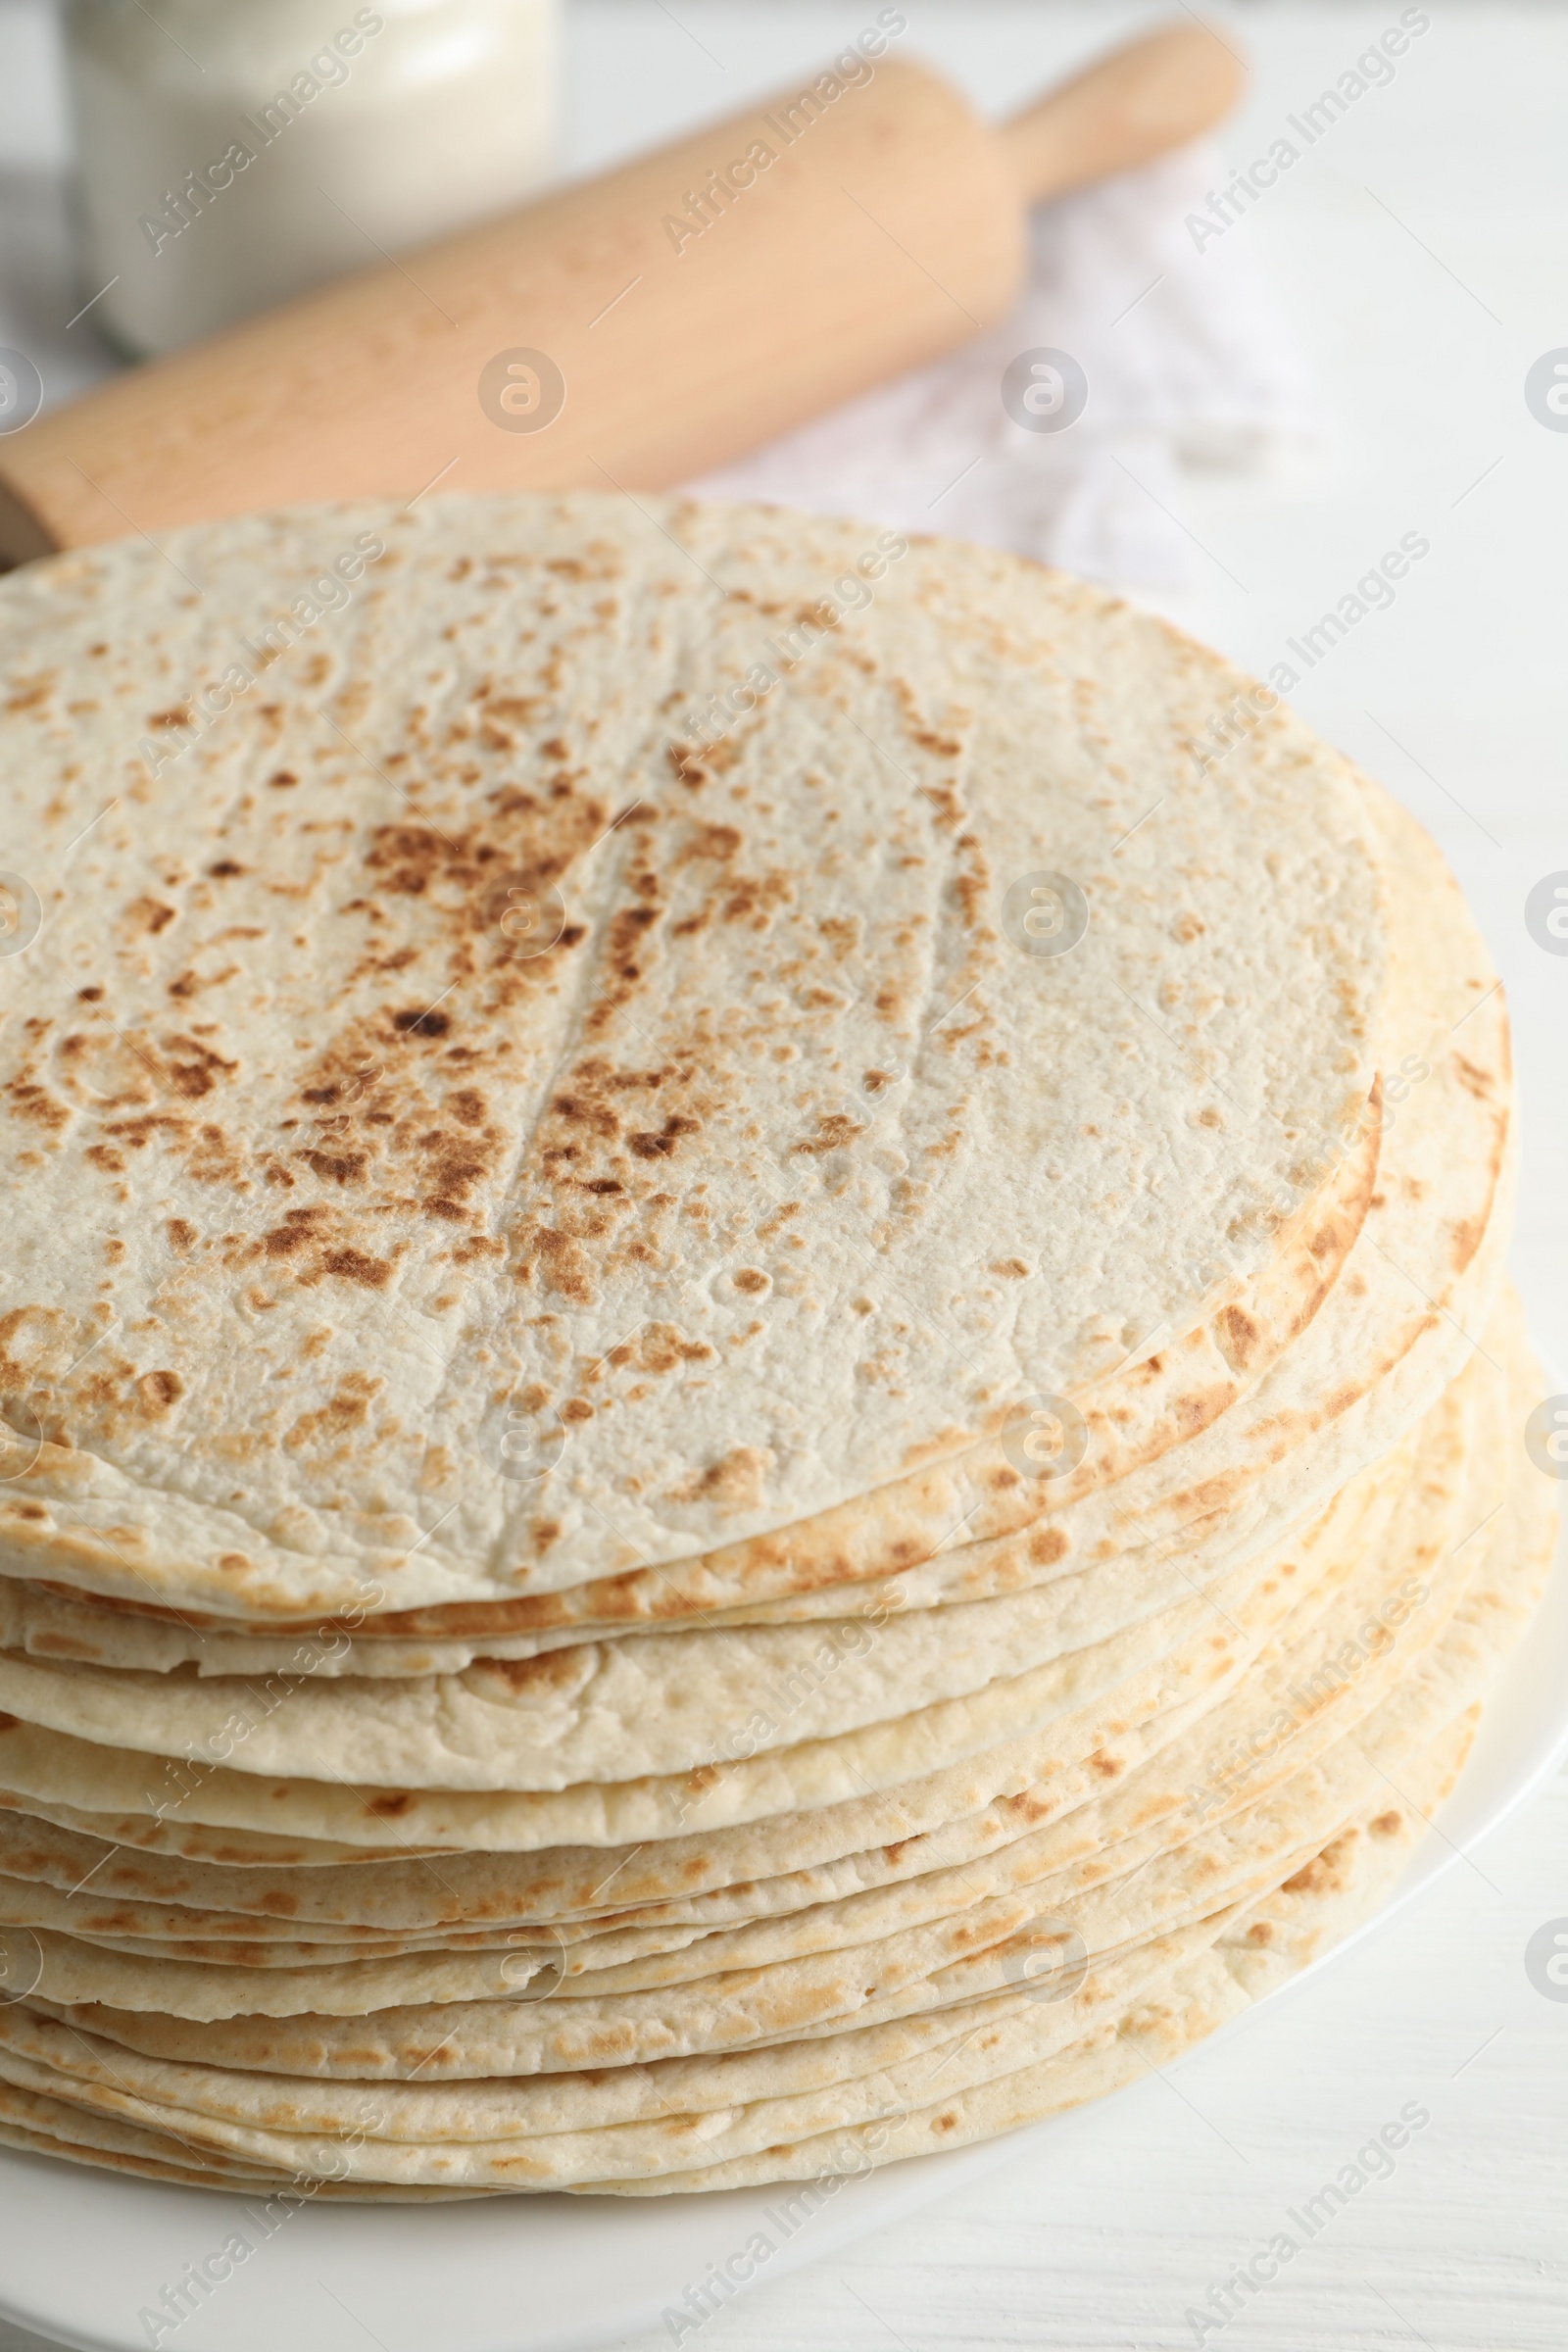 Photo of Tasty homemade tortillas and rolling pin on white table